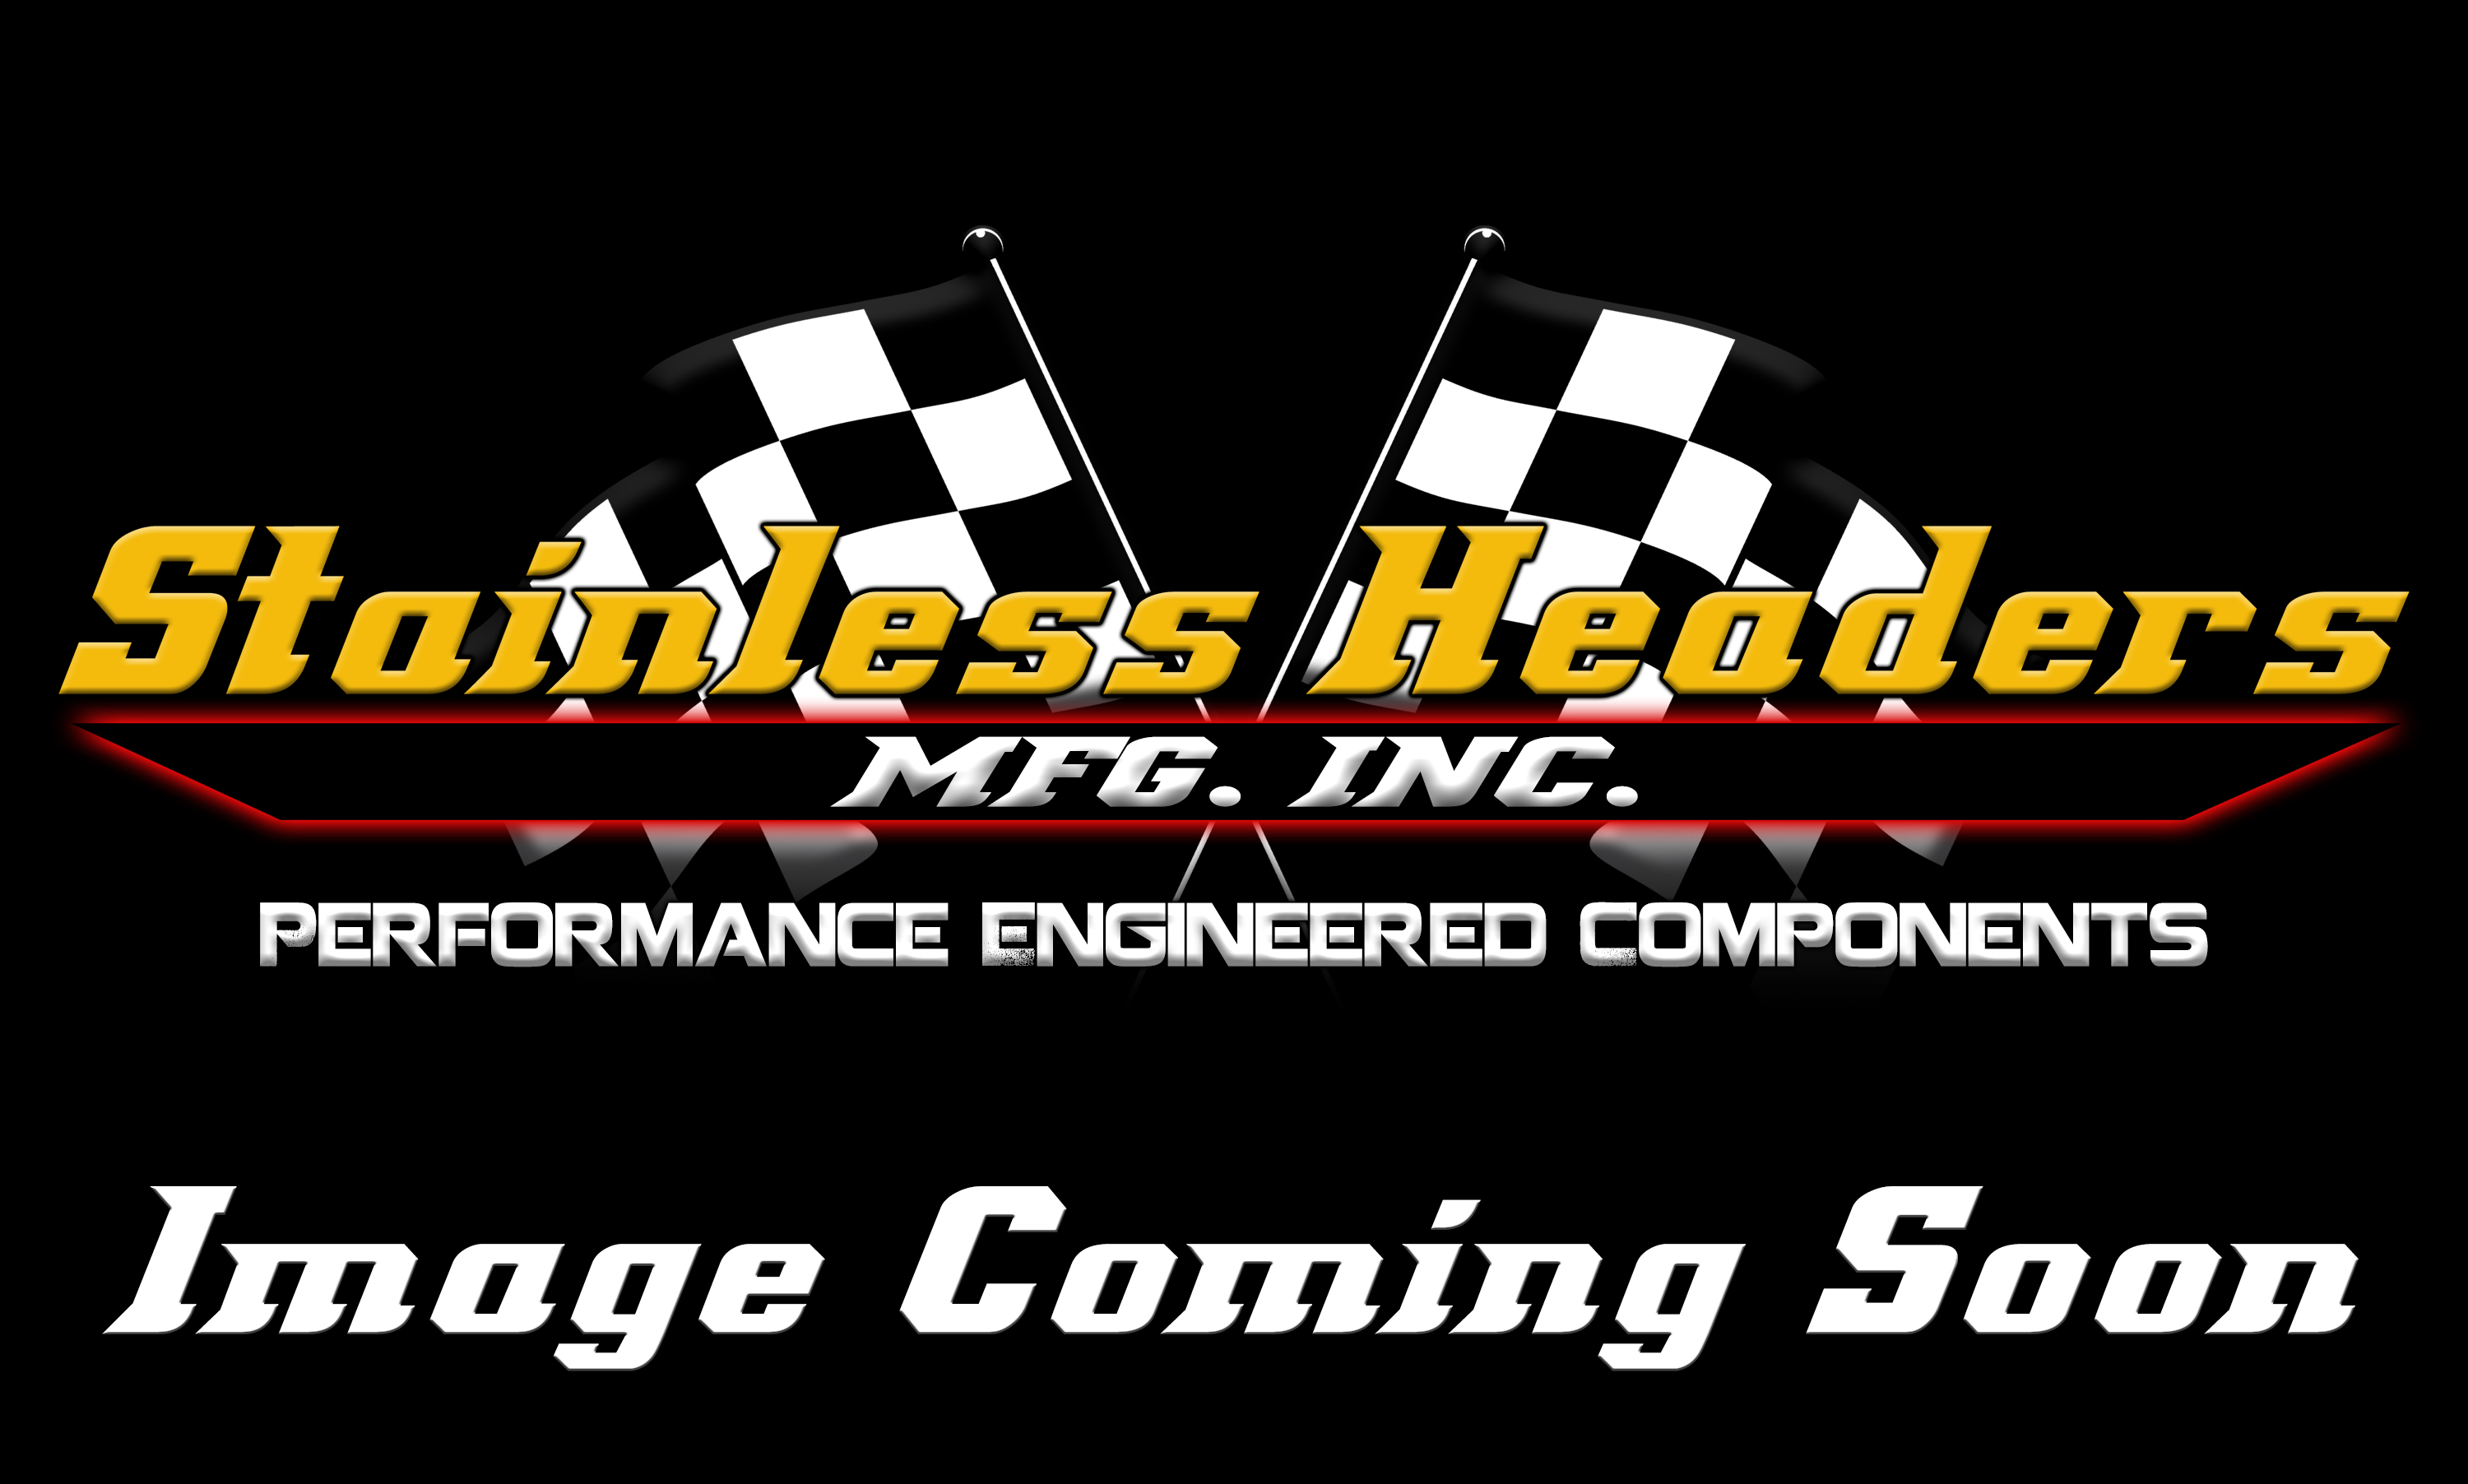 Stainless Headers - 1 5/8" Primary 2 into 1 Performance Merge Collector-16ga 304ss